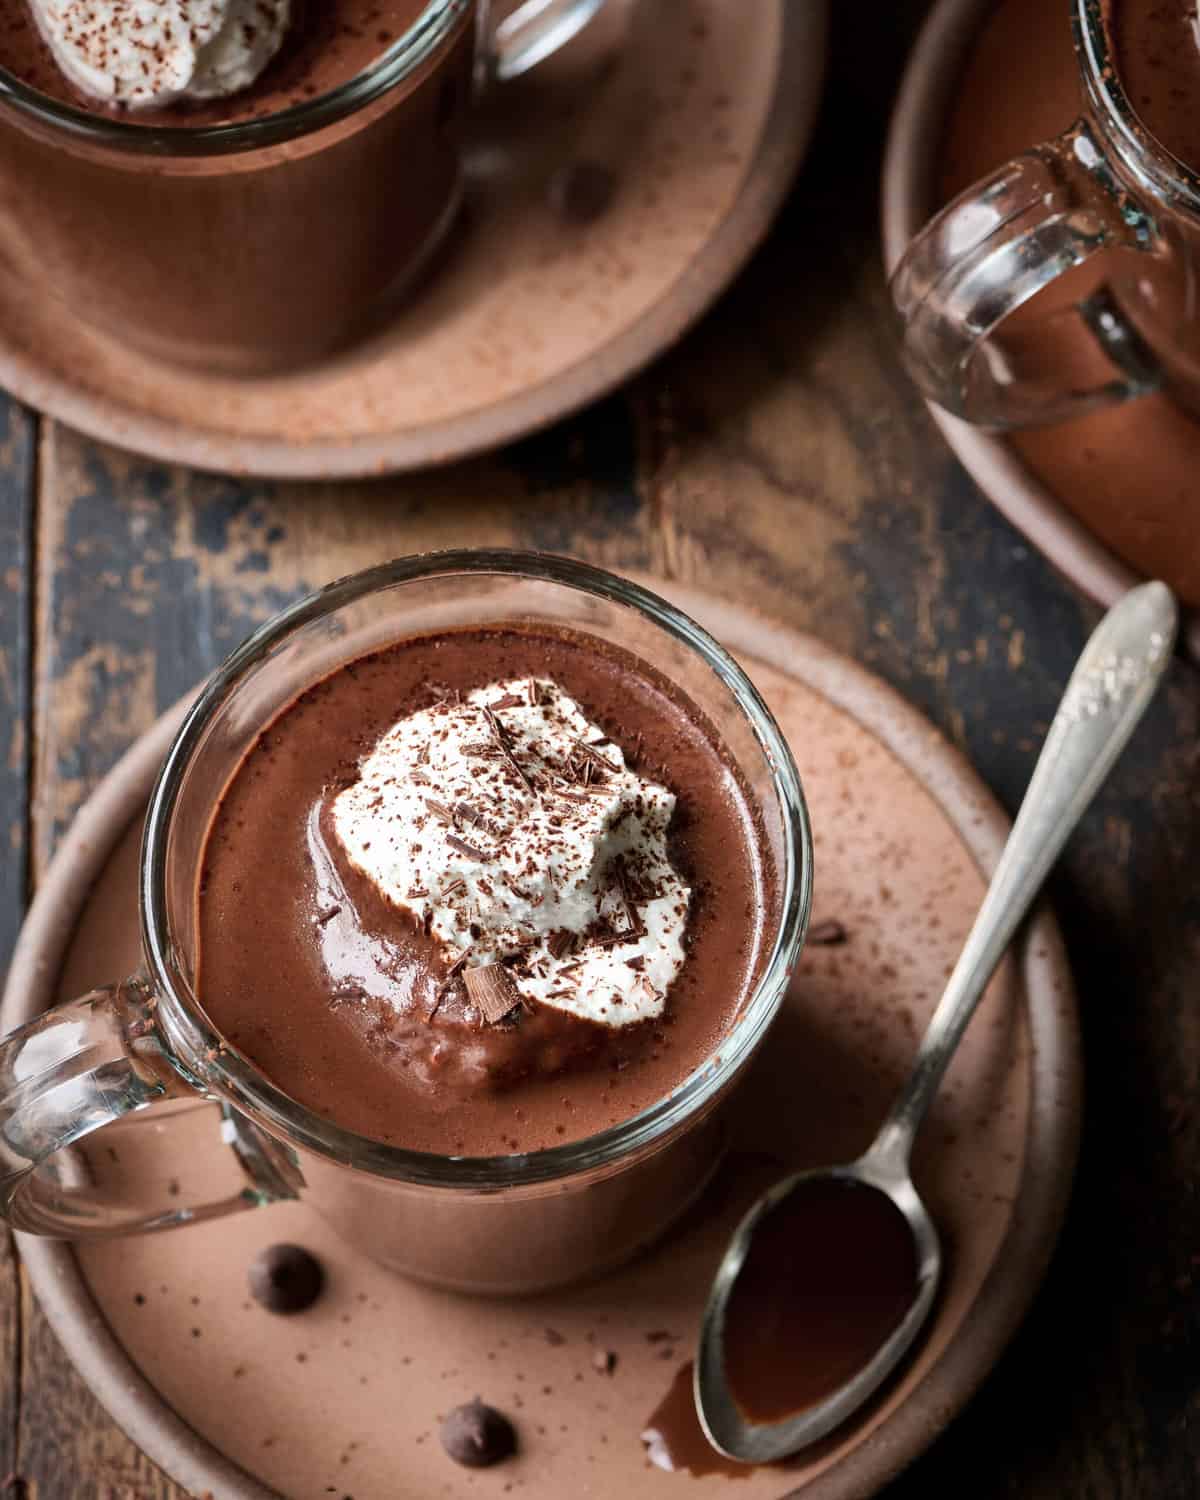 Overhead view of three mugs of hot chocolate with whipped cream on a plate on a wood table.